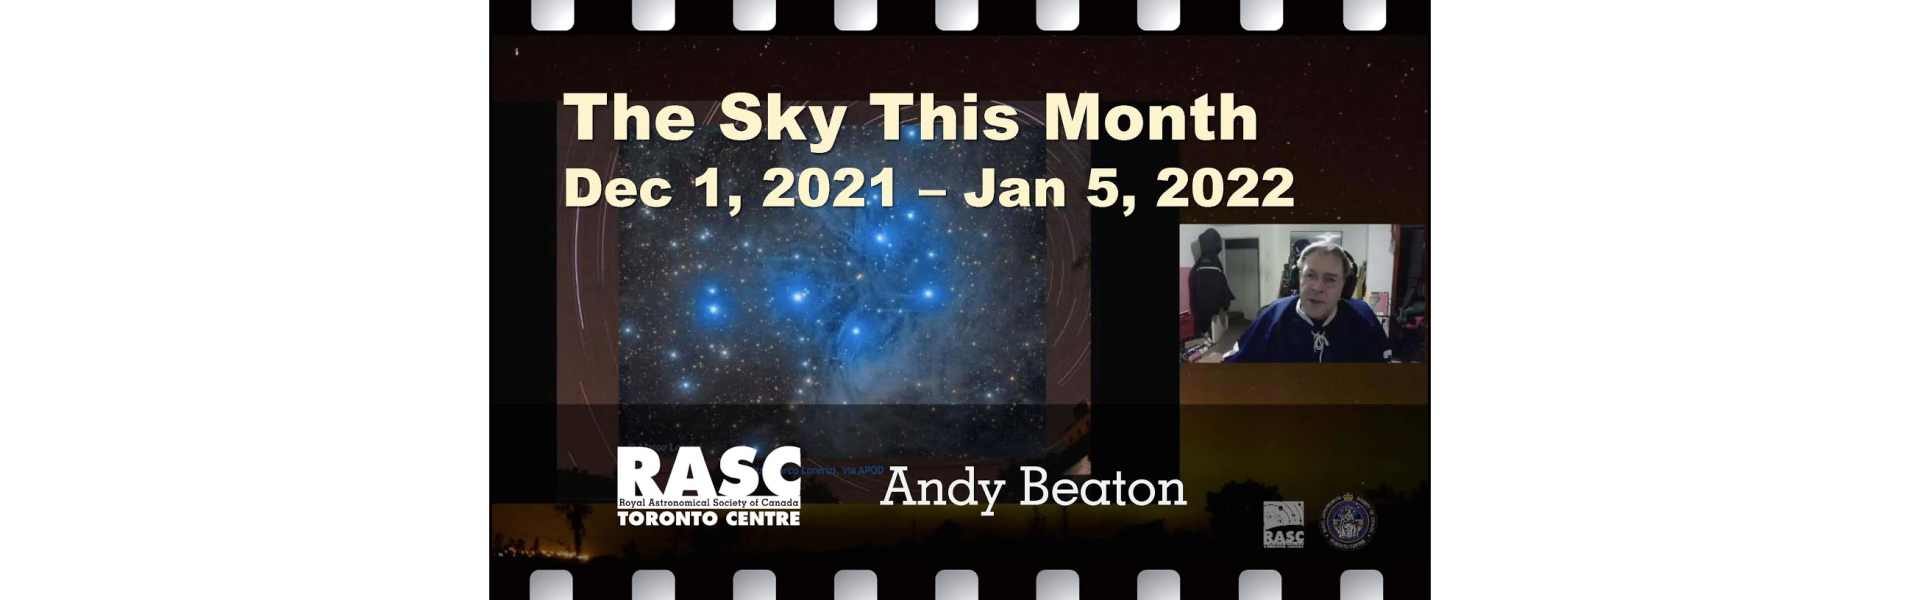 The Sky This Month Dec 1, 2021 - Jan 5, 2022